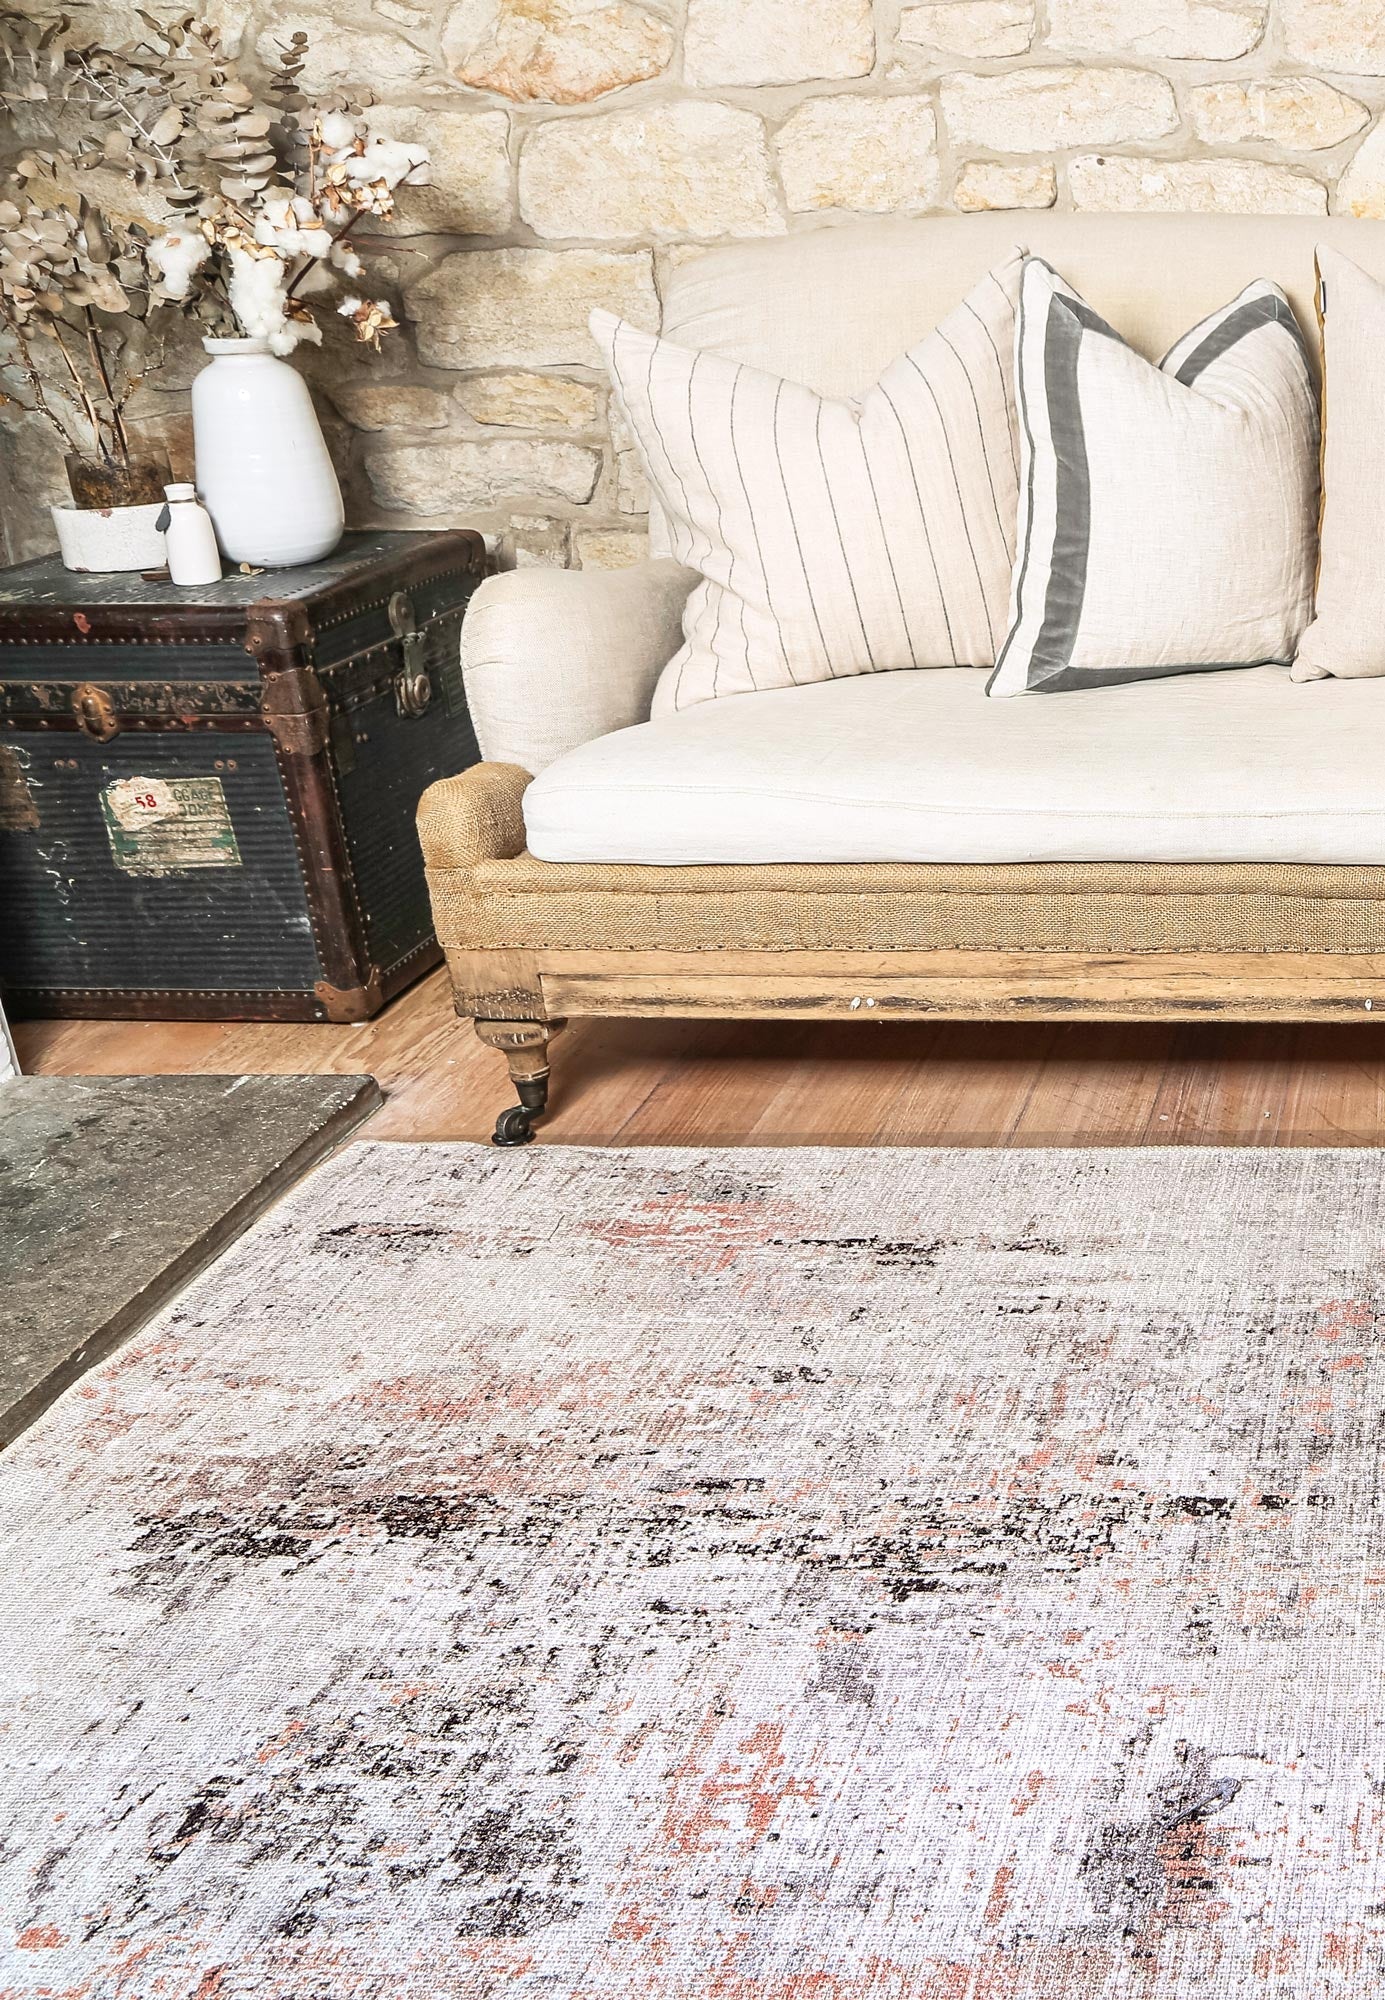 Vintage Crown collection rug with liquid-repellent NanoWipe technology for easy cleaning and durability. Machine washable for convenient care and maintenance.